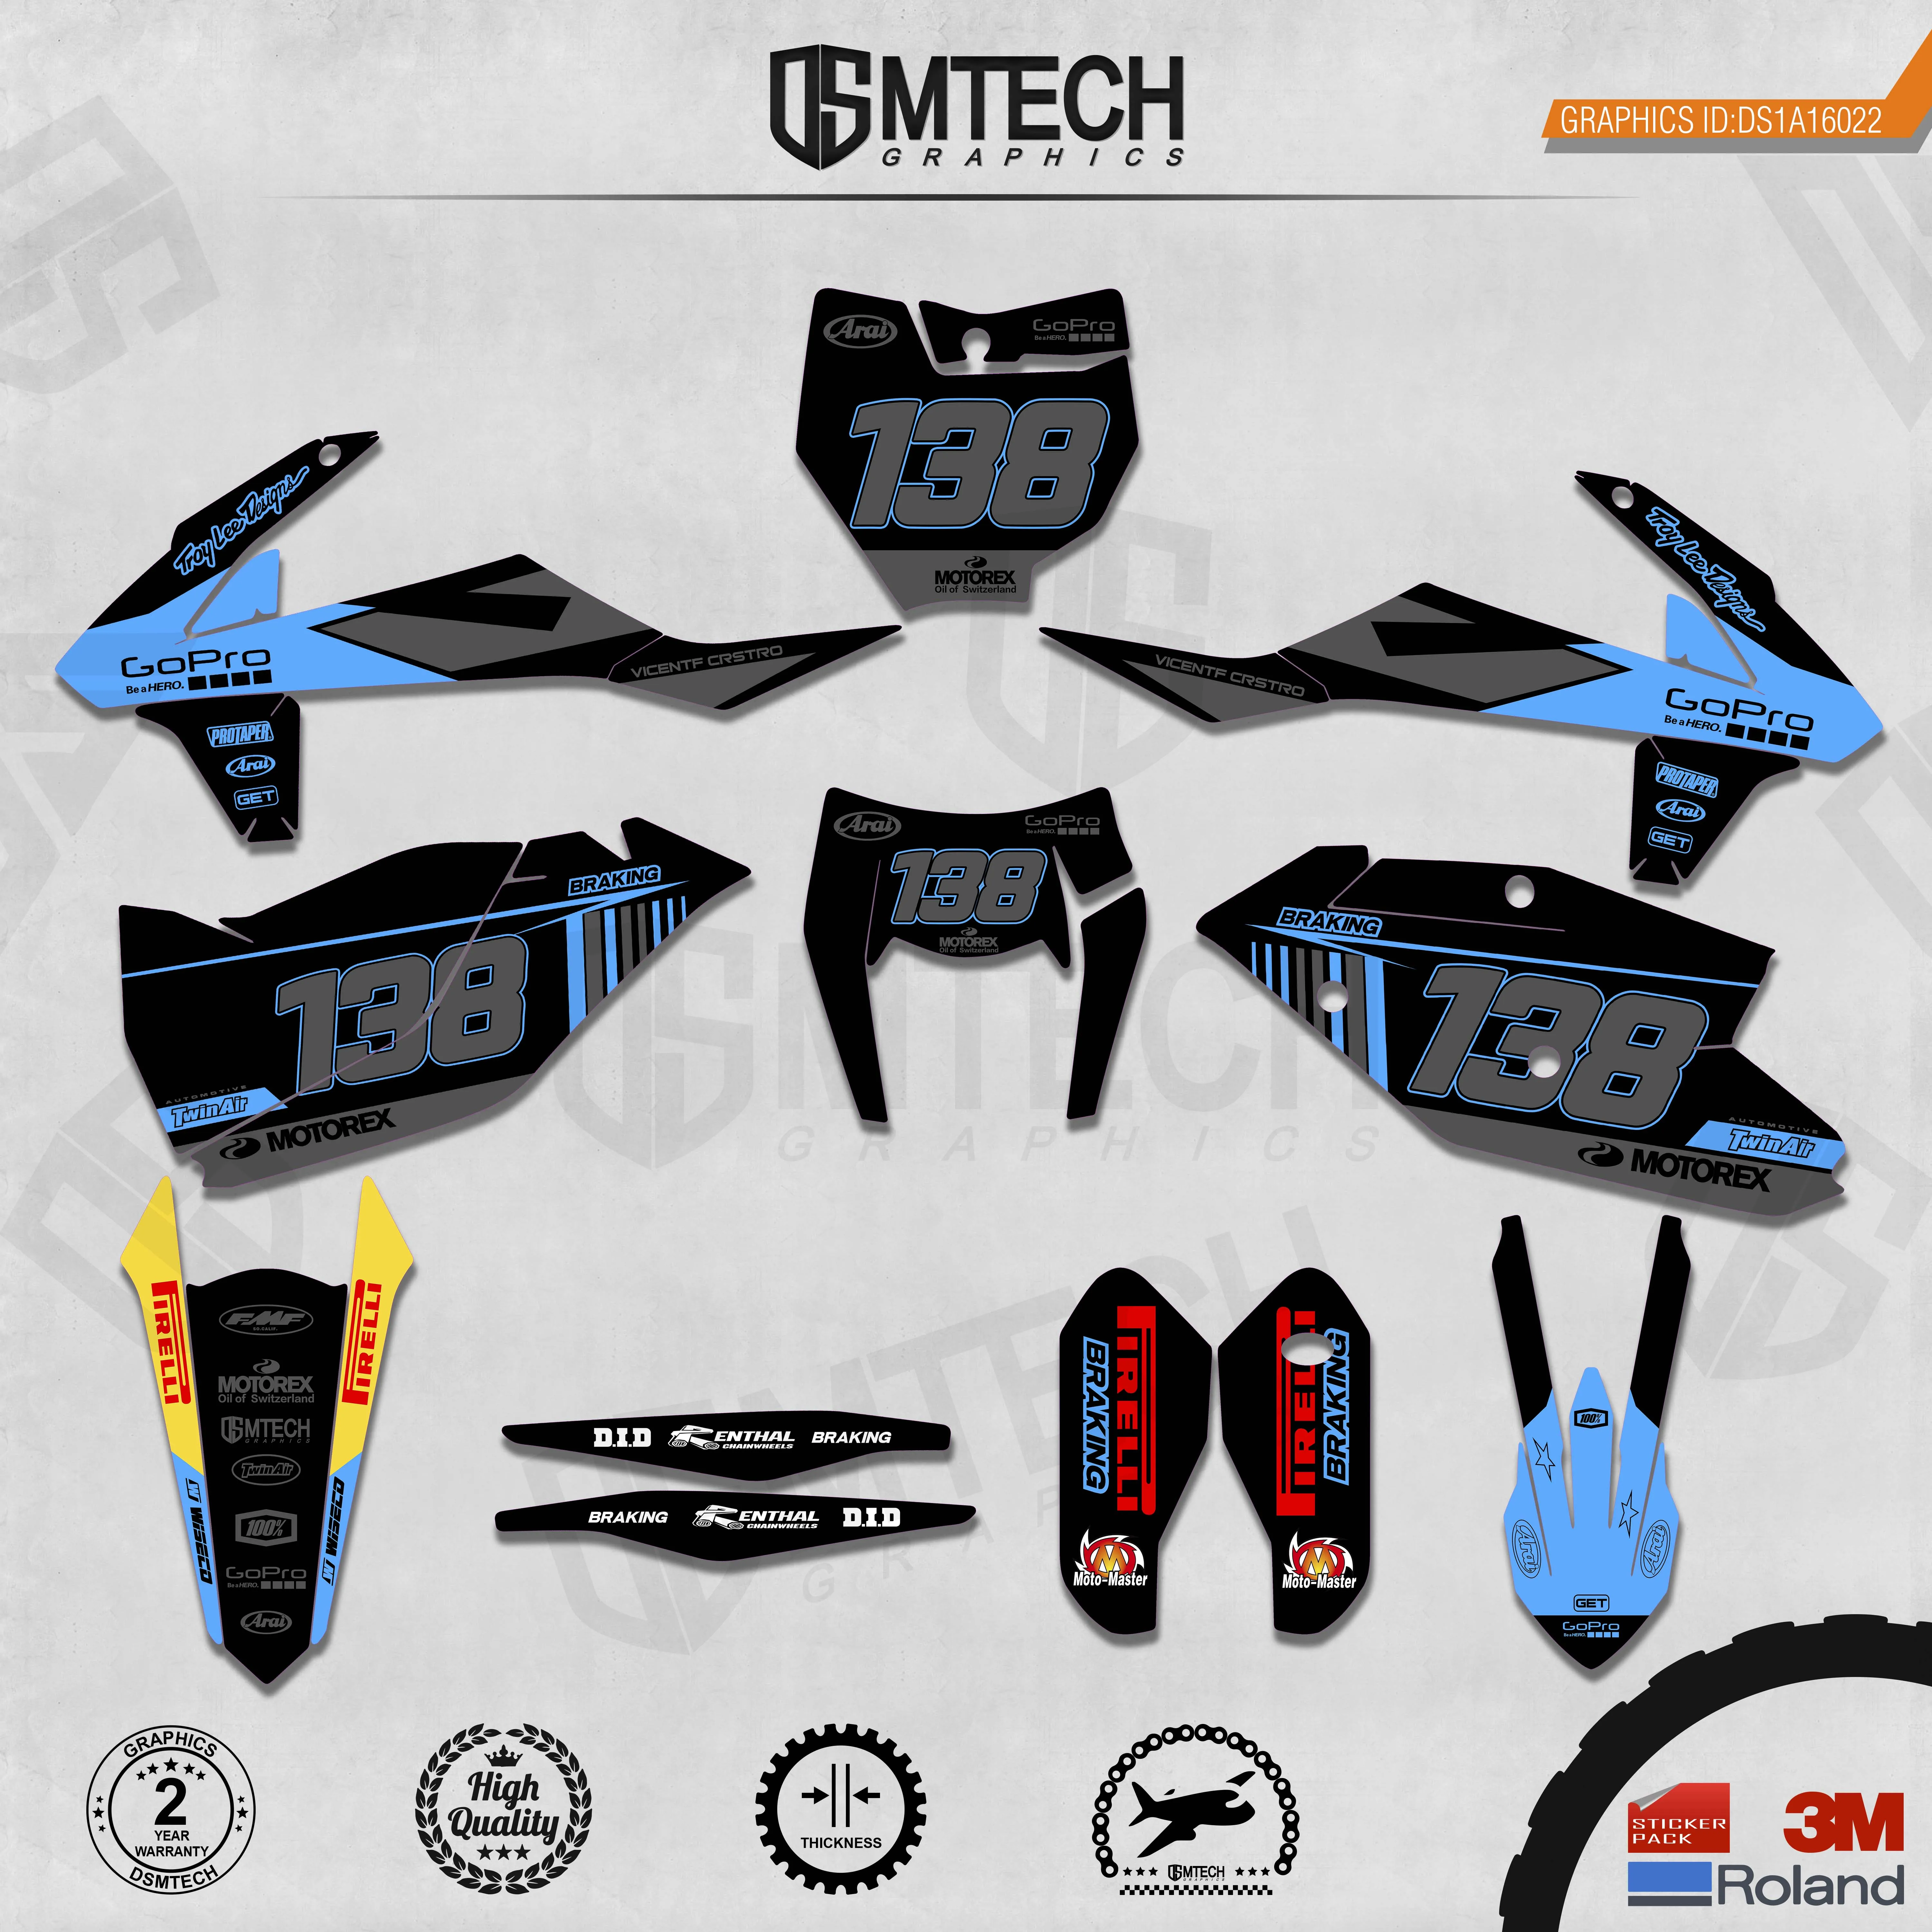 DSMTECH Customized Team Graphics Backgrounds Decals 3M Custom Stickers For KTM 2017-2019 EXC 2016-2018 SXF  022